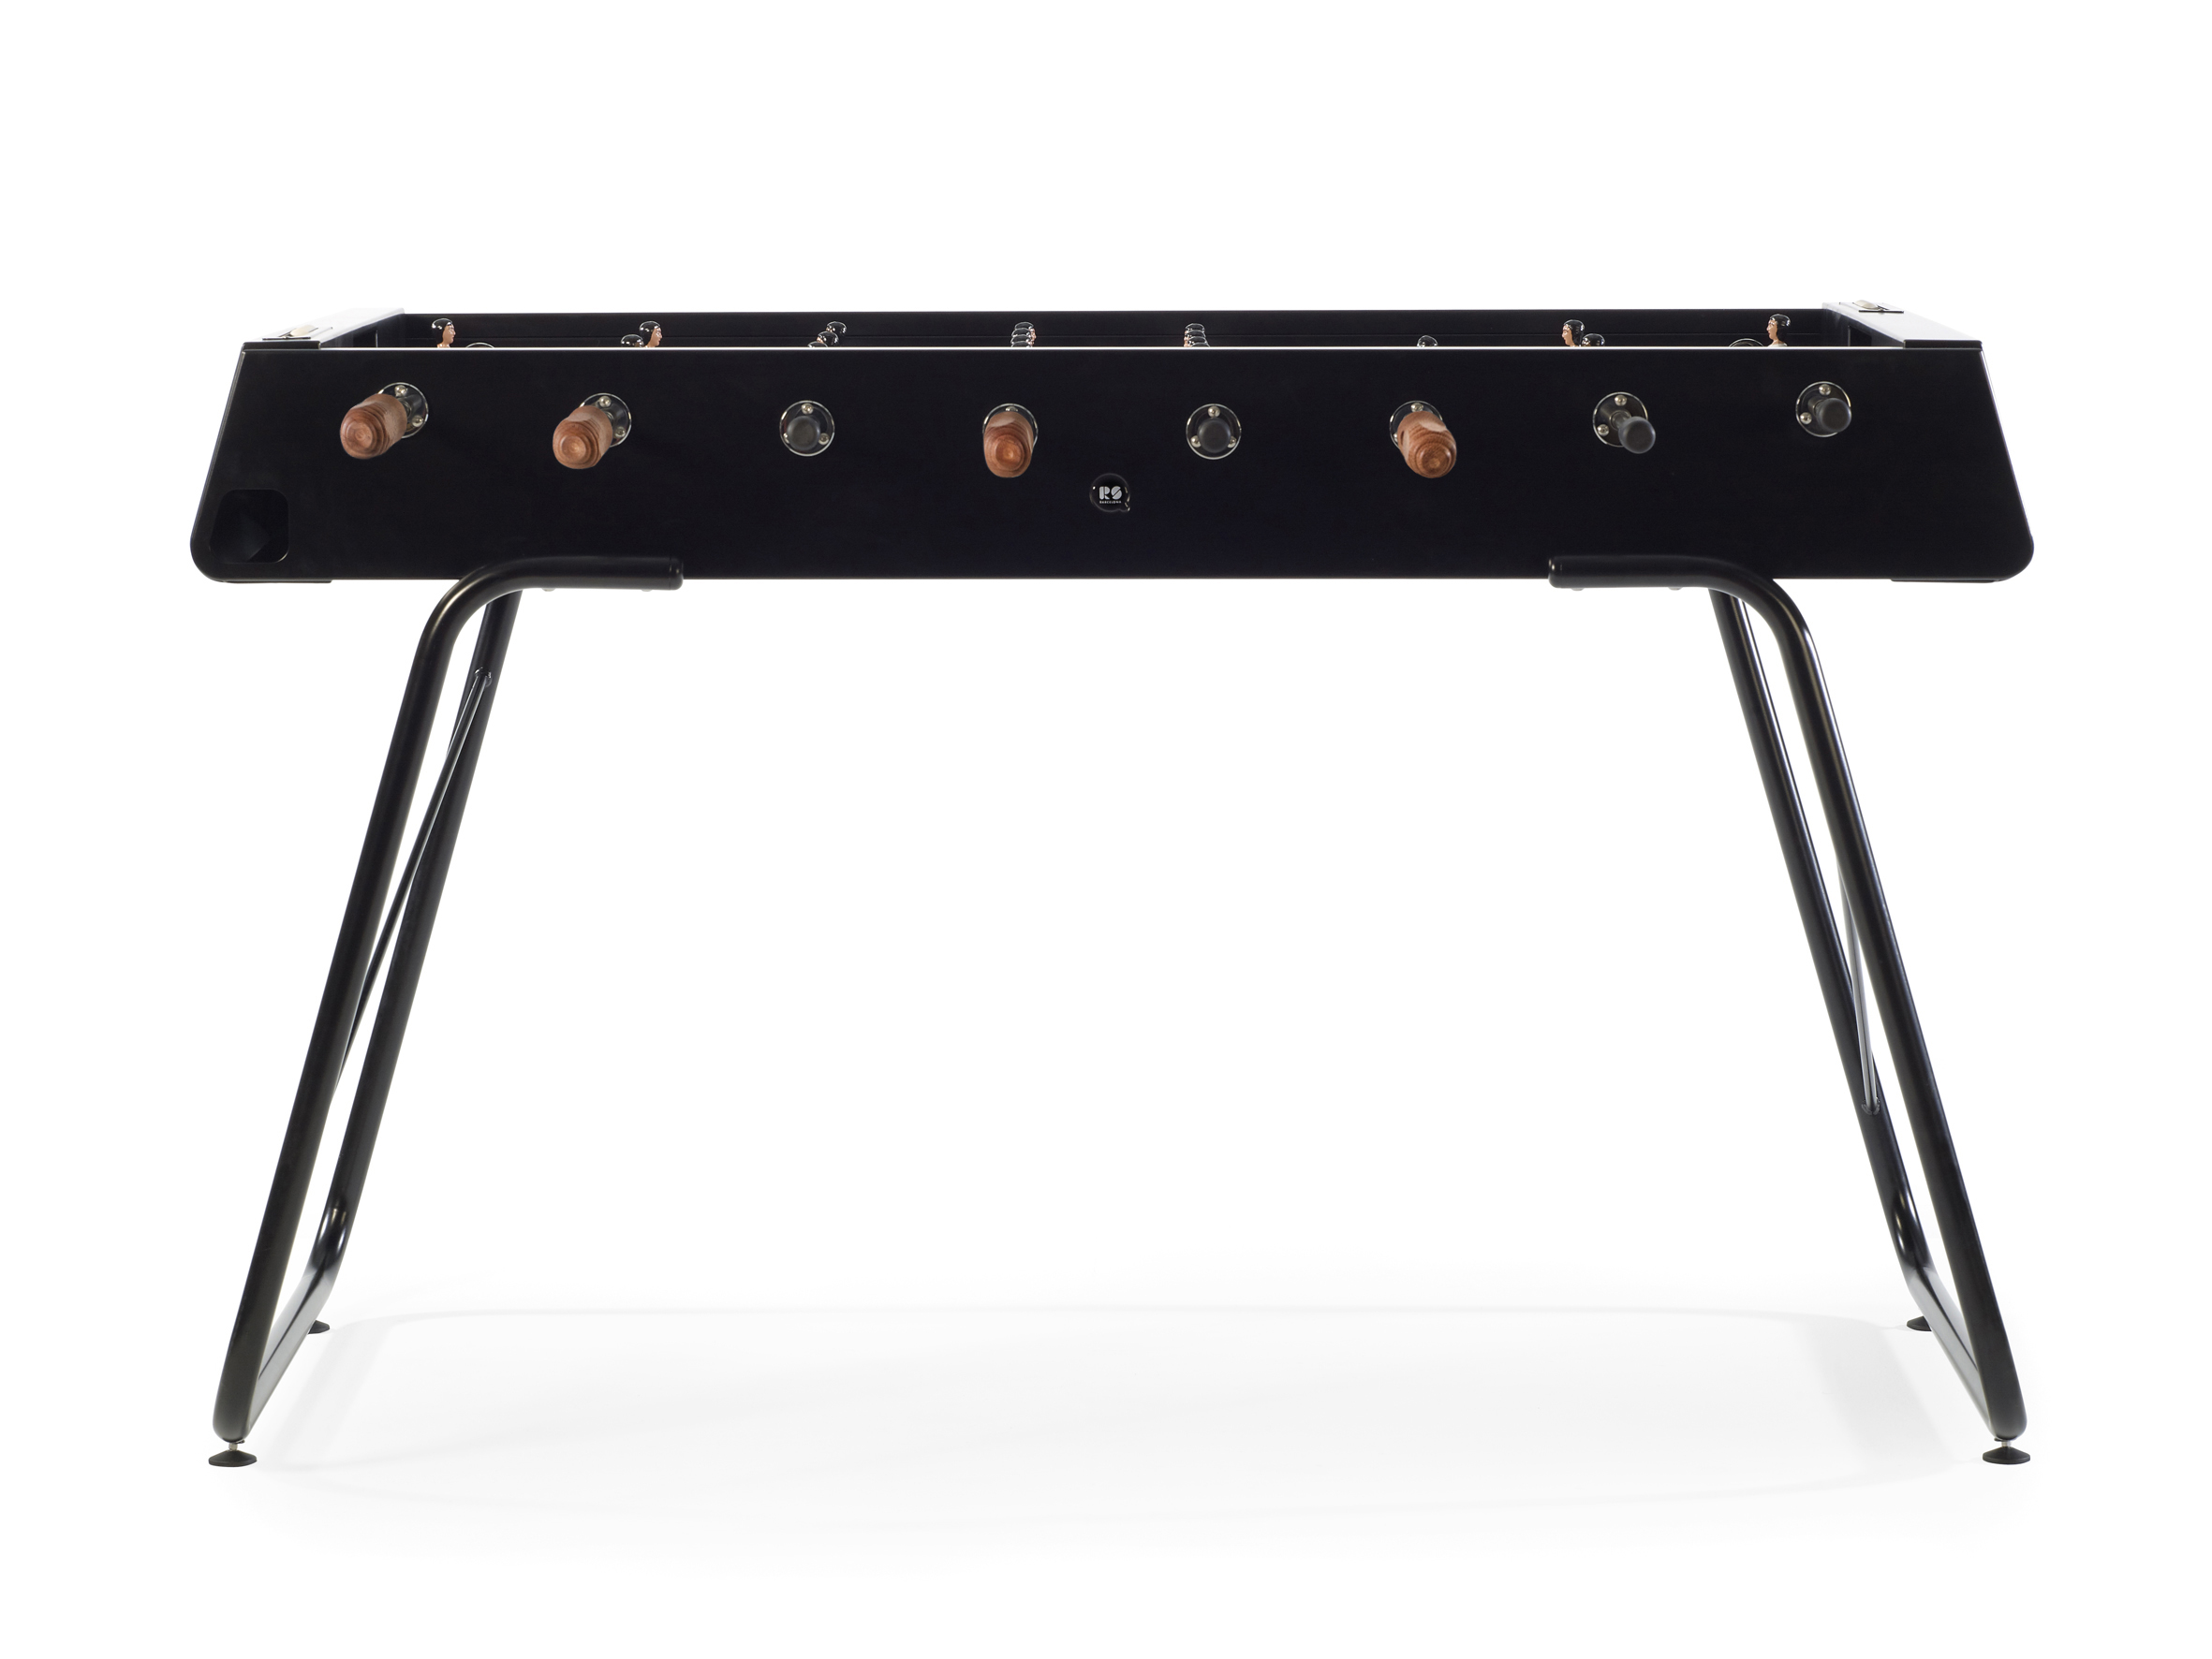 Football table "Flexible" - design RS#3 from RS Barcelona (in- & outdoor)